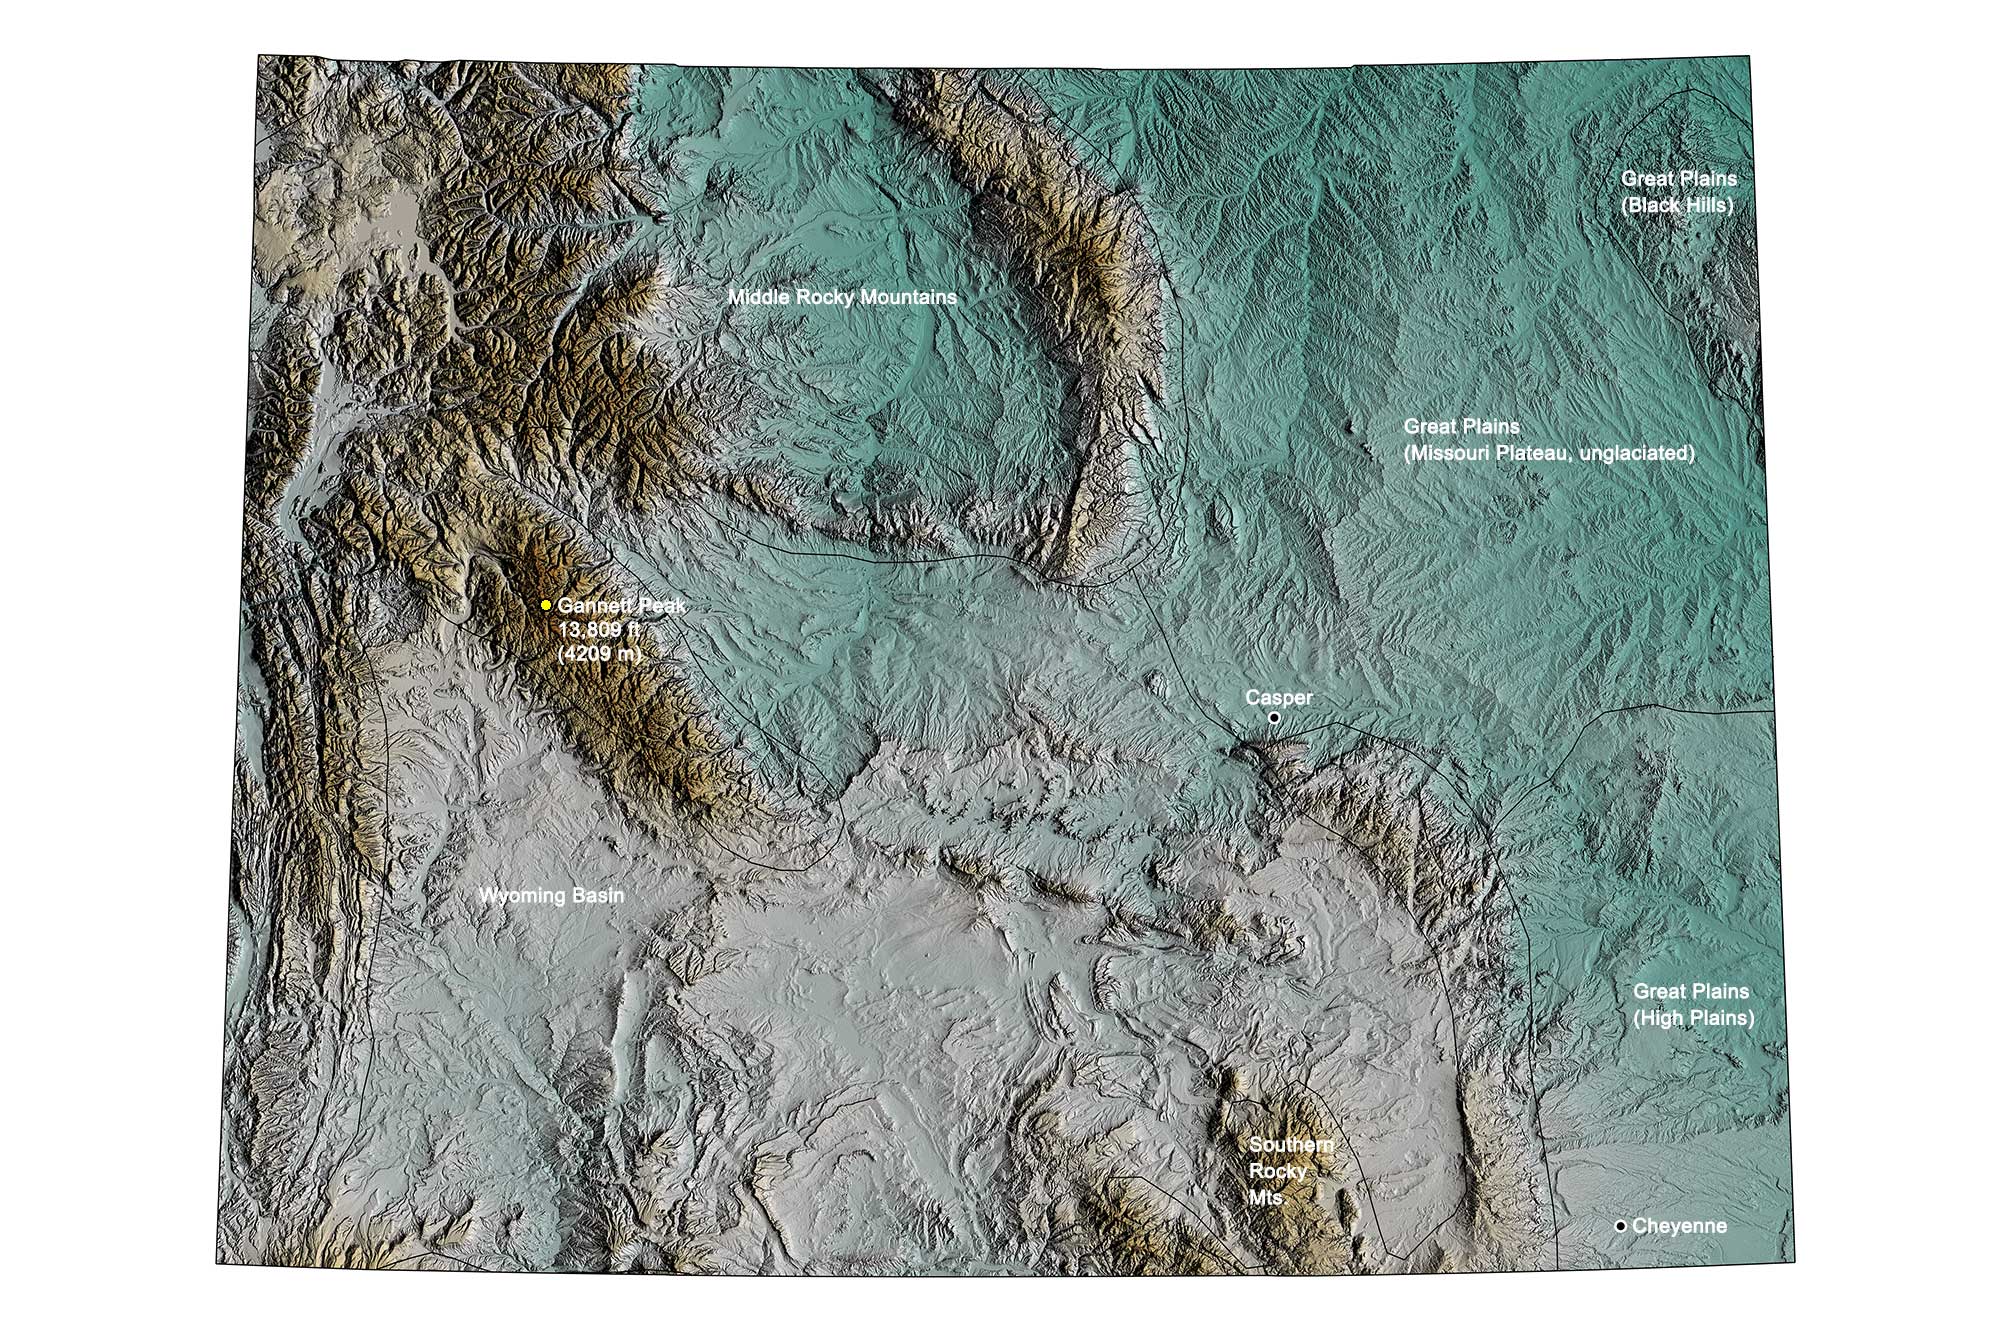 Topographic map of Wyoming.